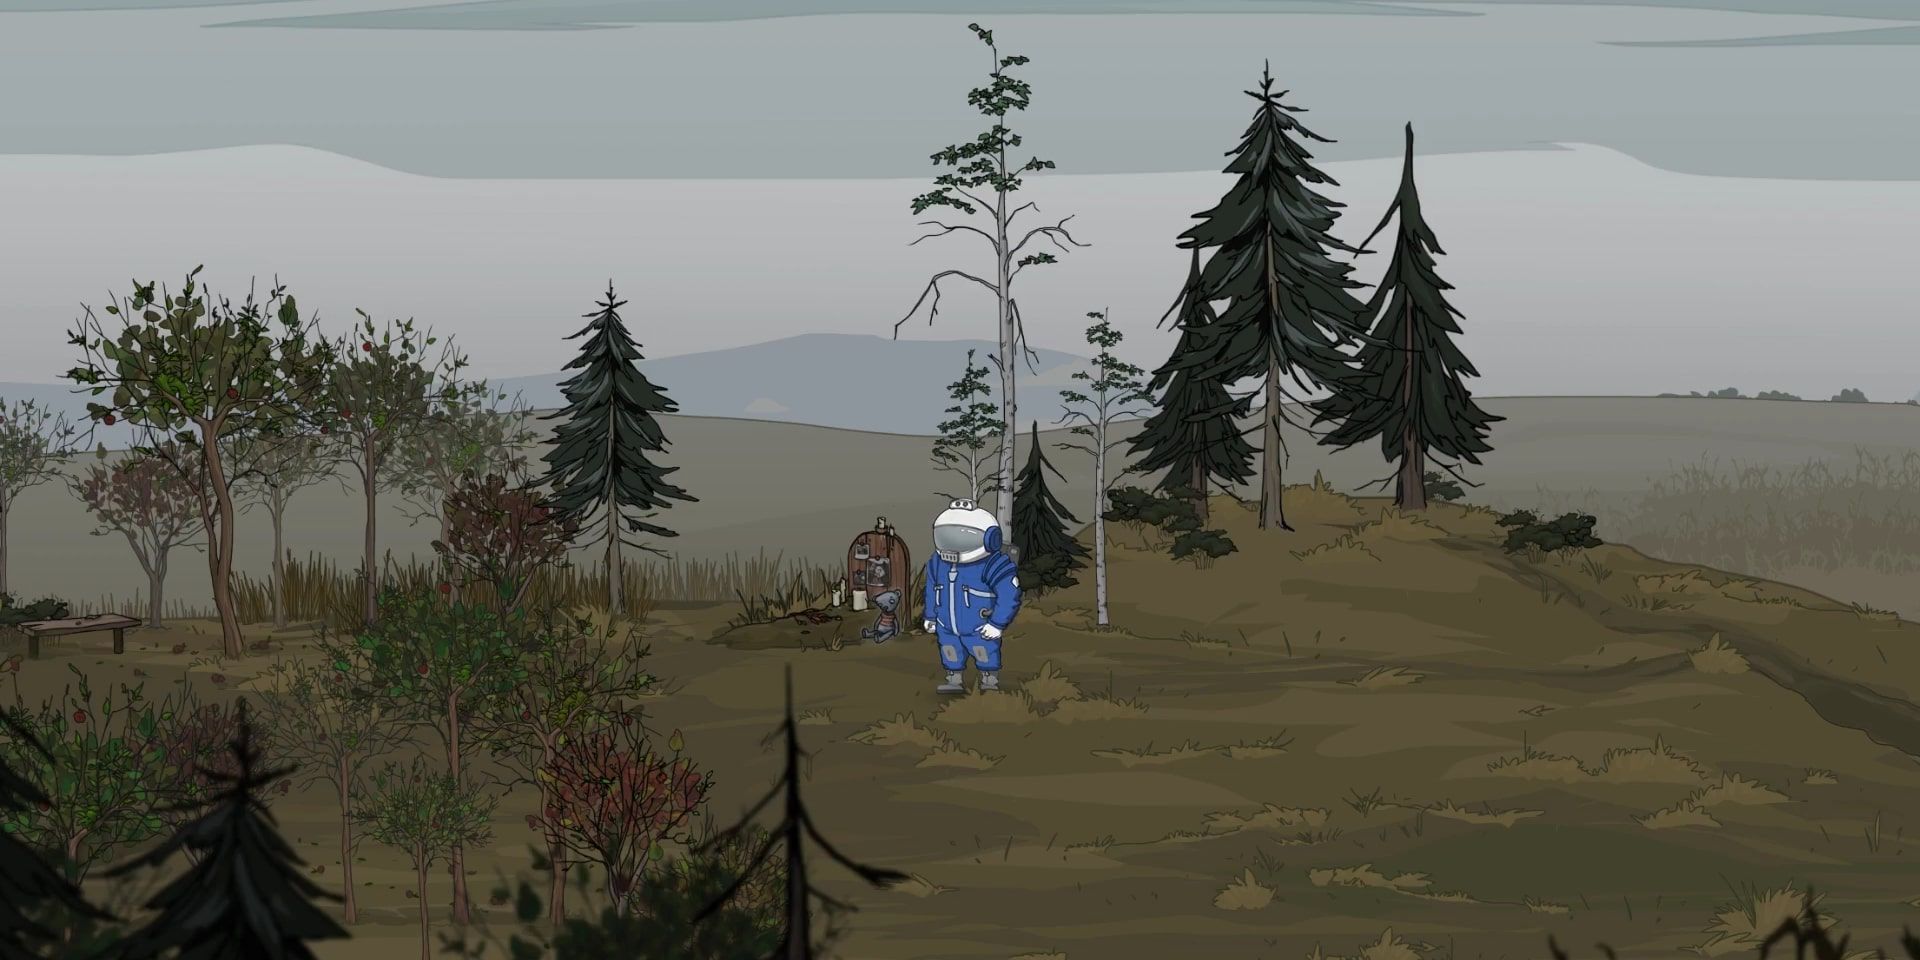 Astronaut Kosmos standing in the apocalyptic landscape of a forest on Earth, having just returned.